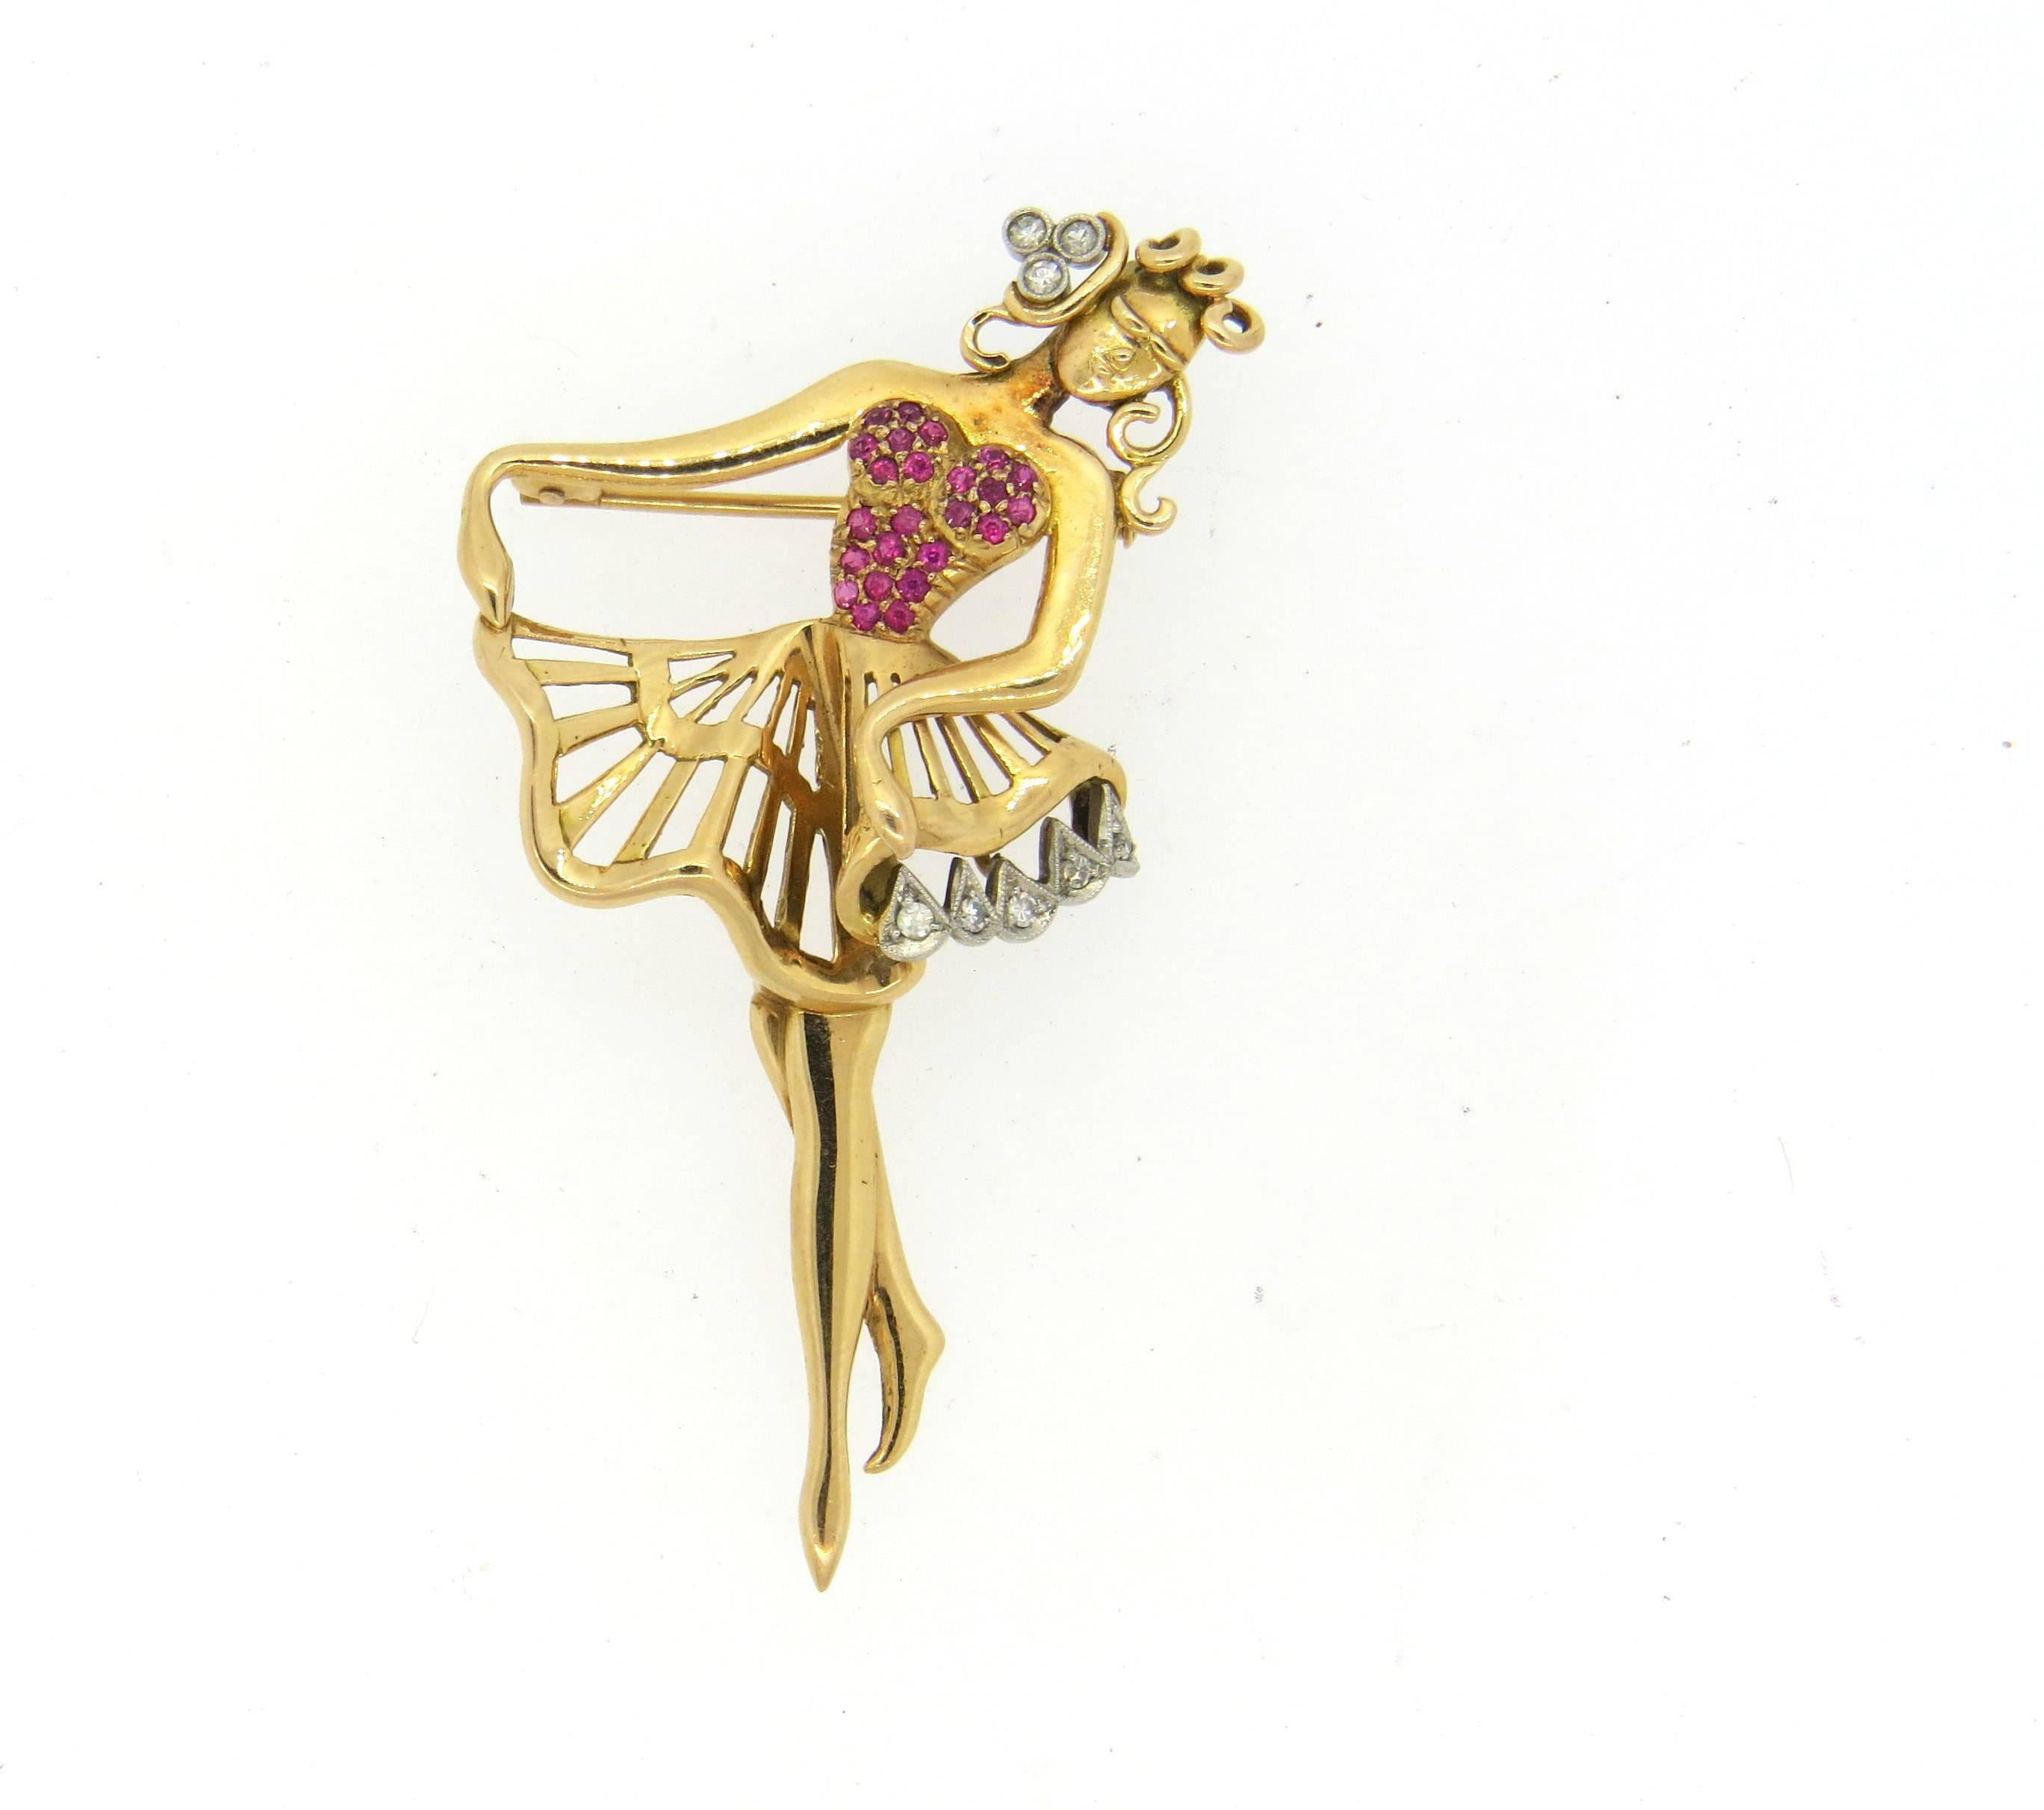 Whimsical 18k gold brooch, depicting dancing young woman, decorated with diamonds and rubies. Brooch measures 63mm x 35mm. Weight of the piece - 11.8 grams 